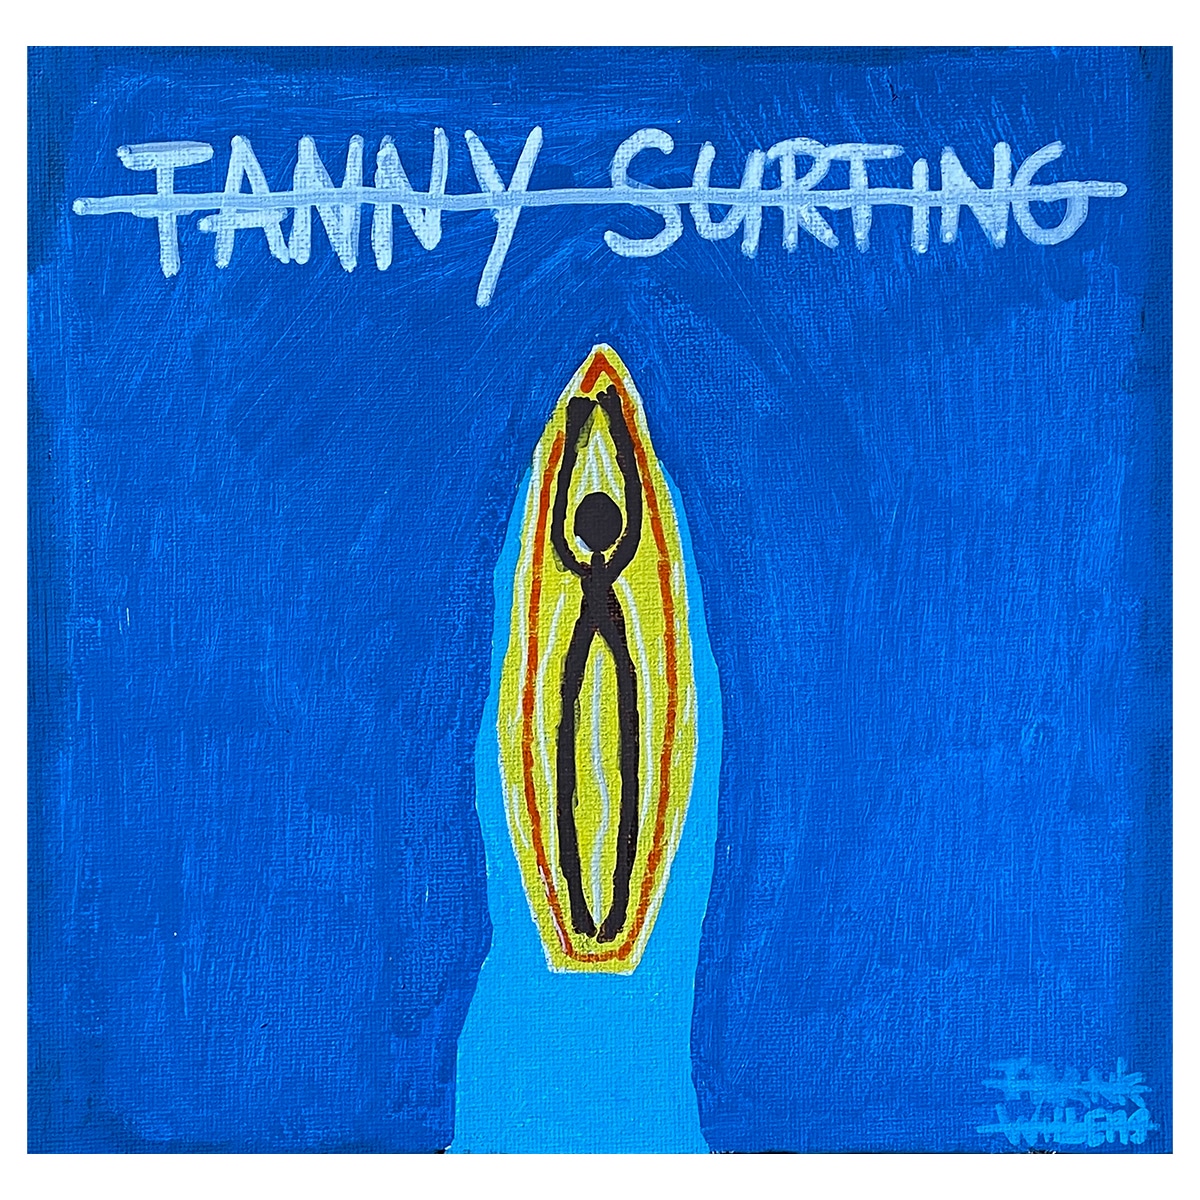 FANNY SURFING - Frank Willems